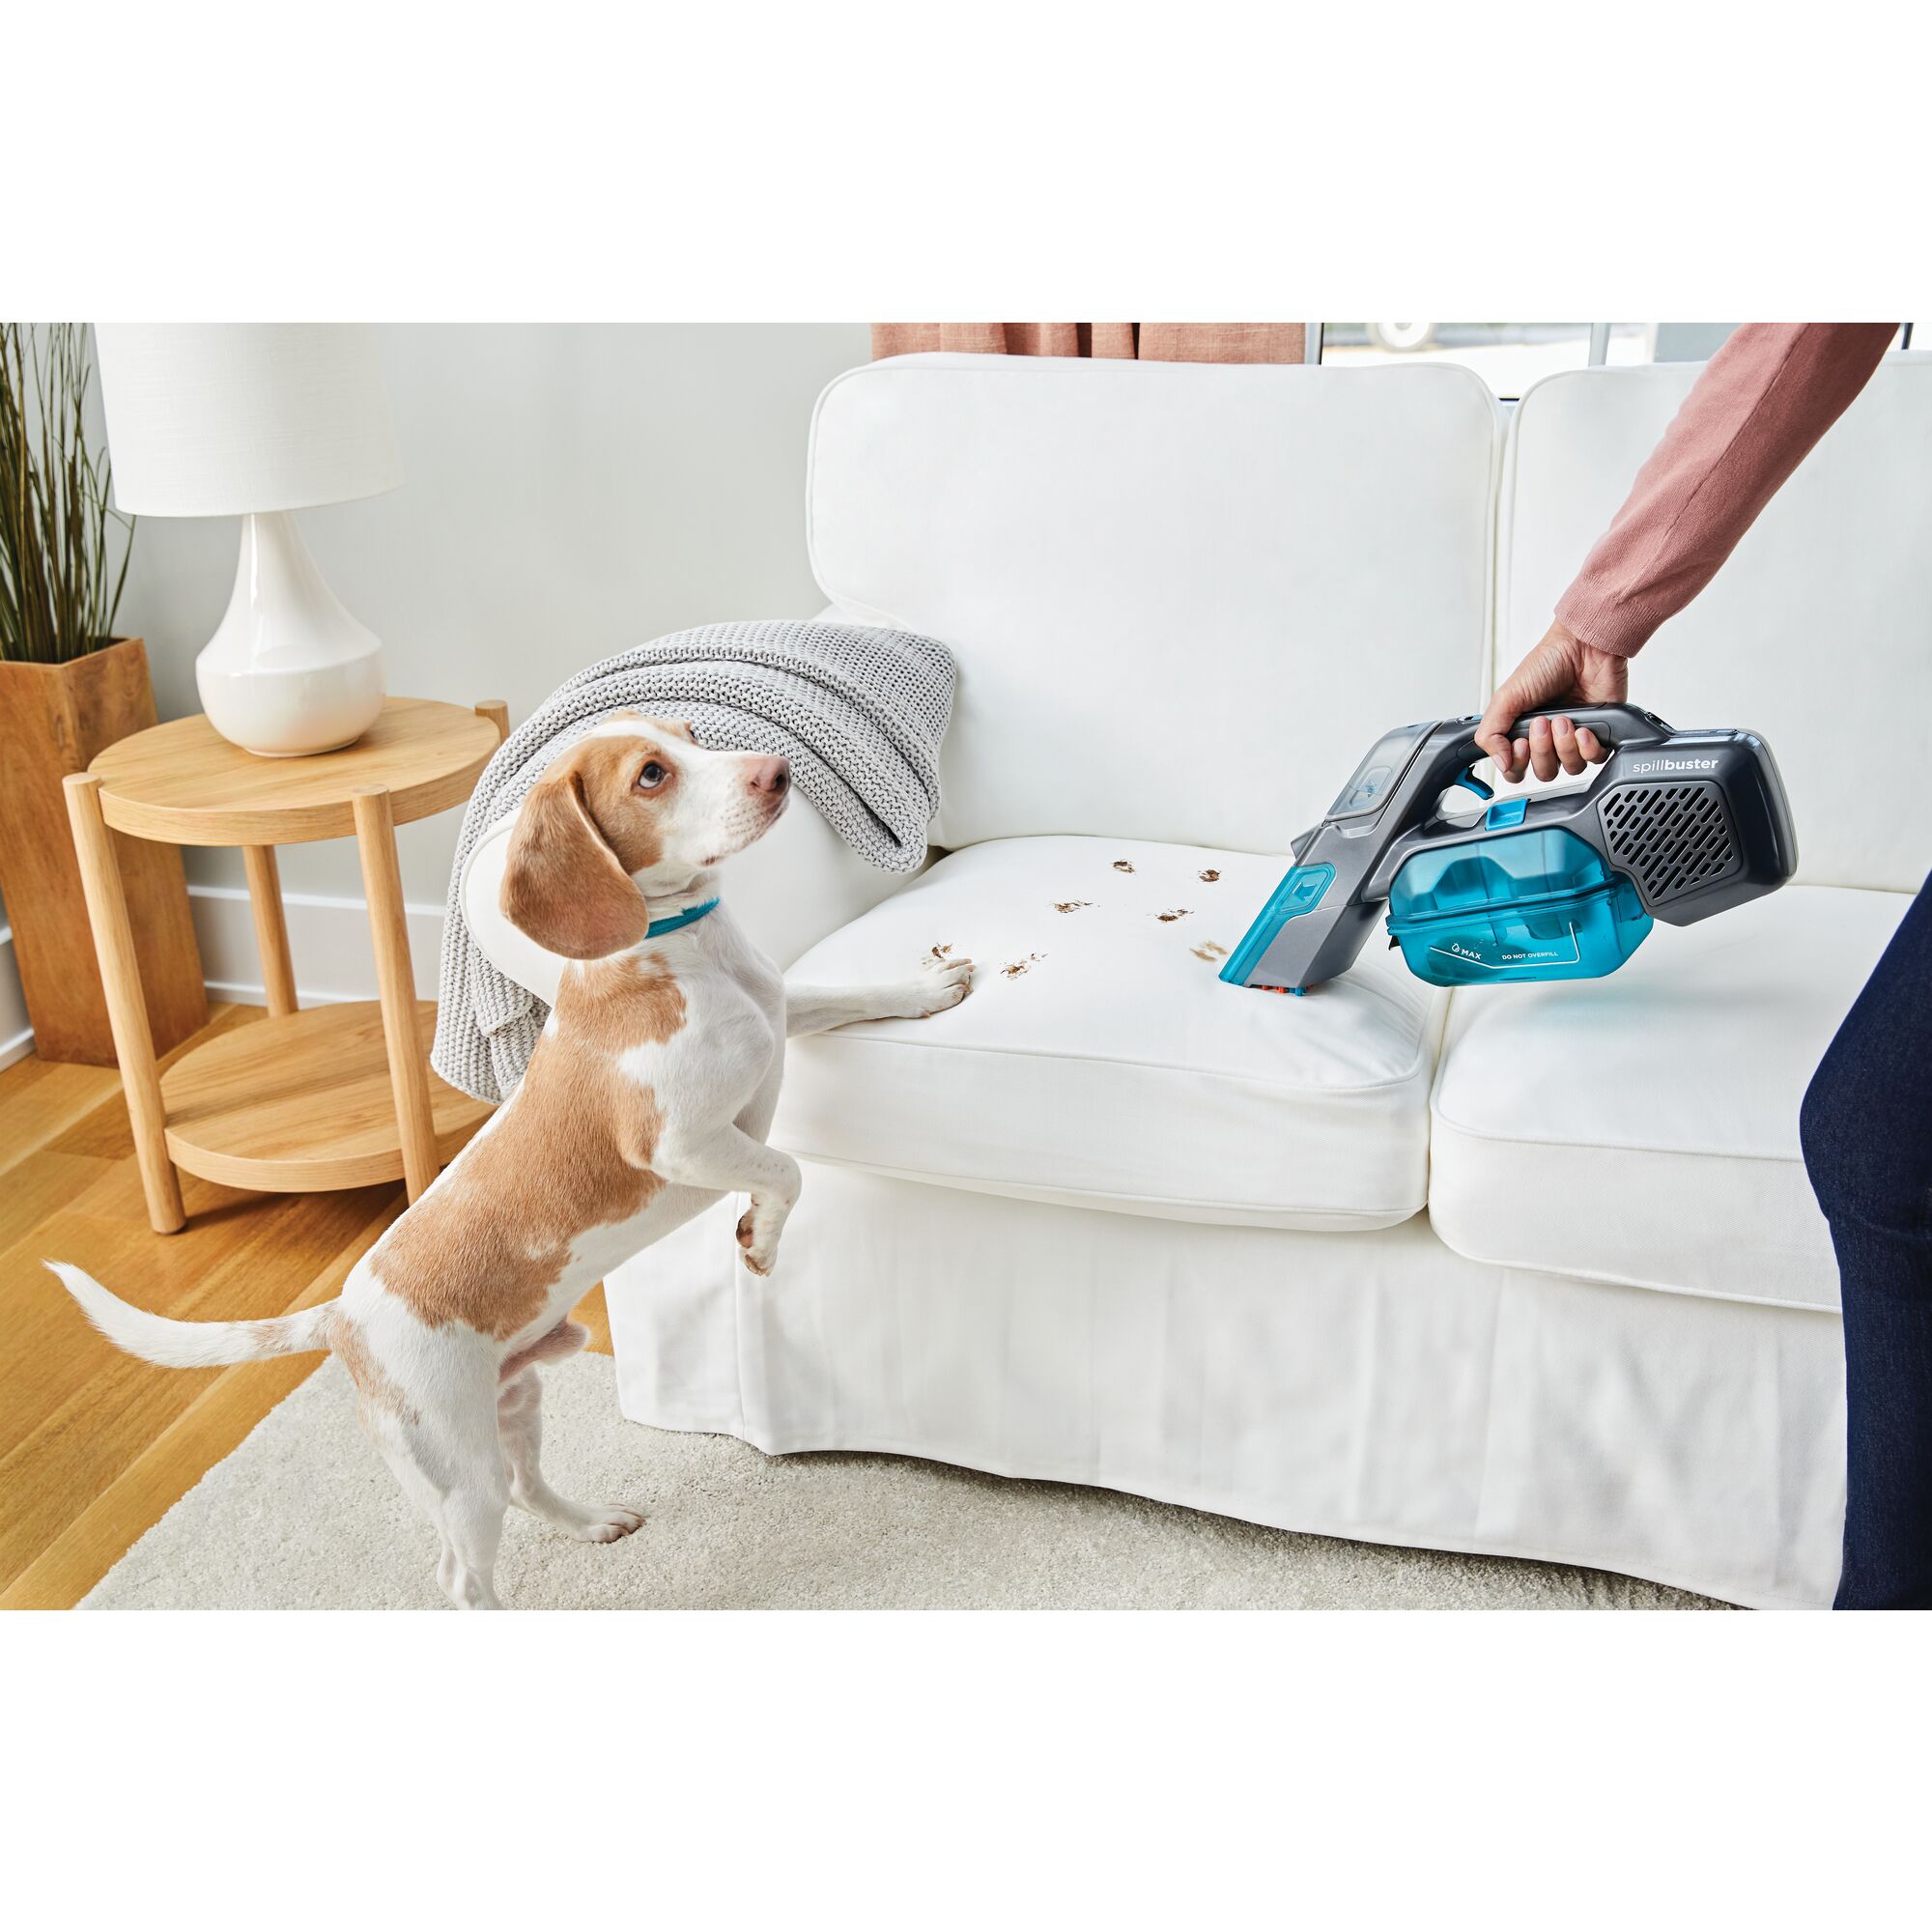 spill buster Cordless Spill plus Spot Cleaner being used to clean mud foot prints of dog from couch.